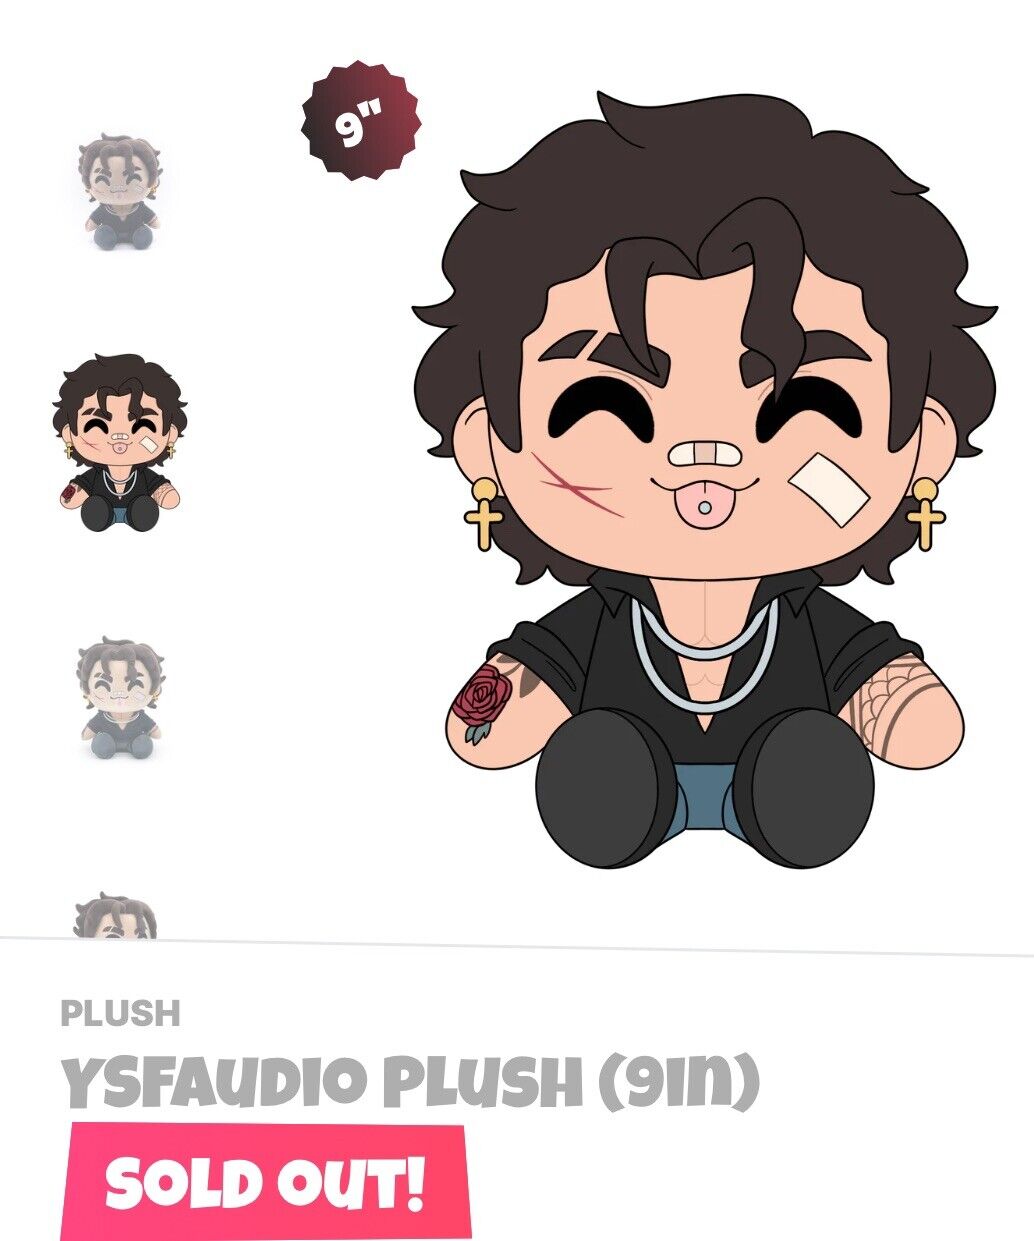 Youtooz * Ysfaudio - 9 Inch Plush * NEW * Sold Out * In Hand